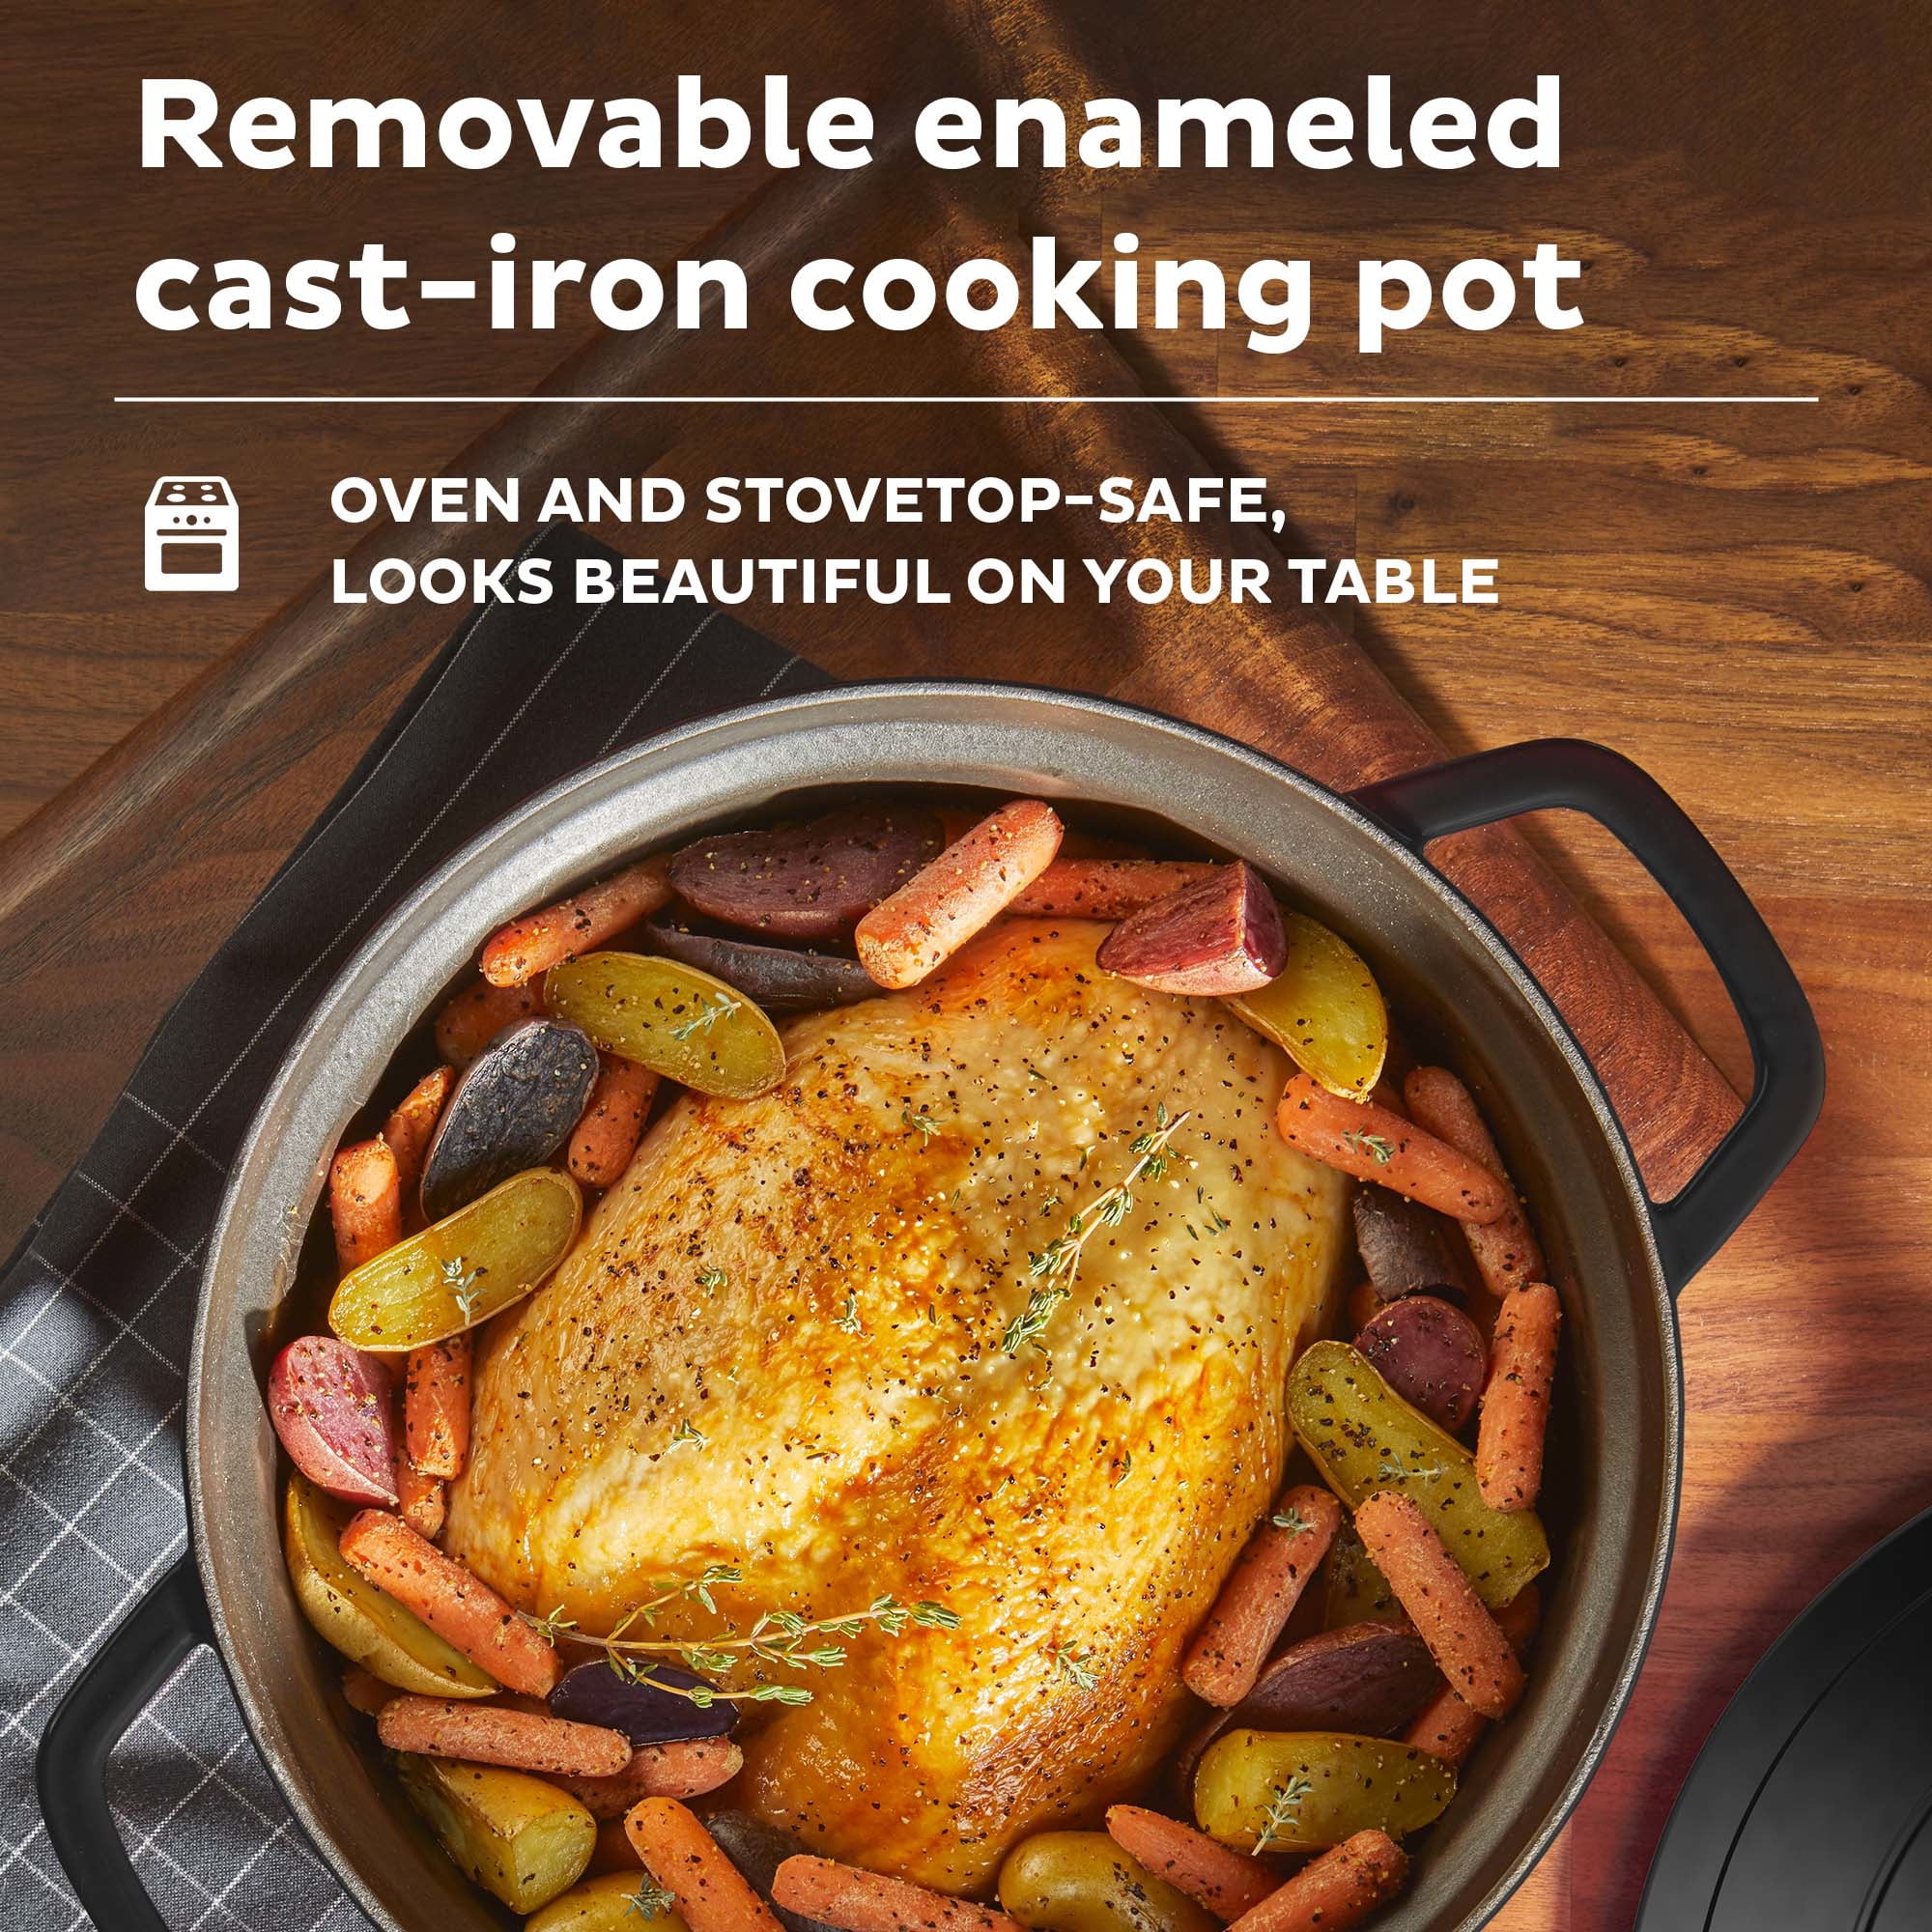 KOOC 10-in-1 Electric Dutch Oven, 6-Quart White, Slow Cook, Braise, Meat  Stew, Sear/Sauté, Enameled Cast Iron with Self-Basting Lid, 1500W